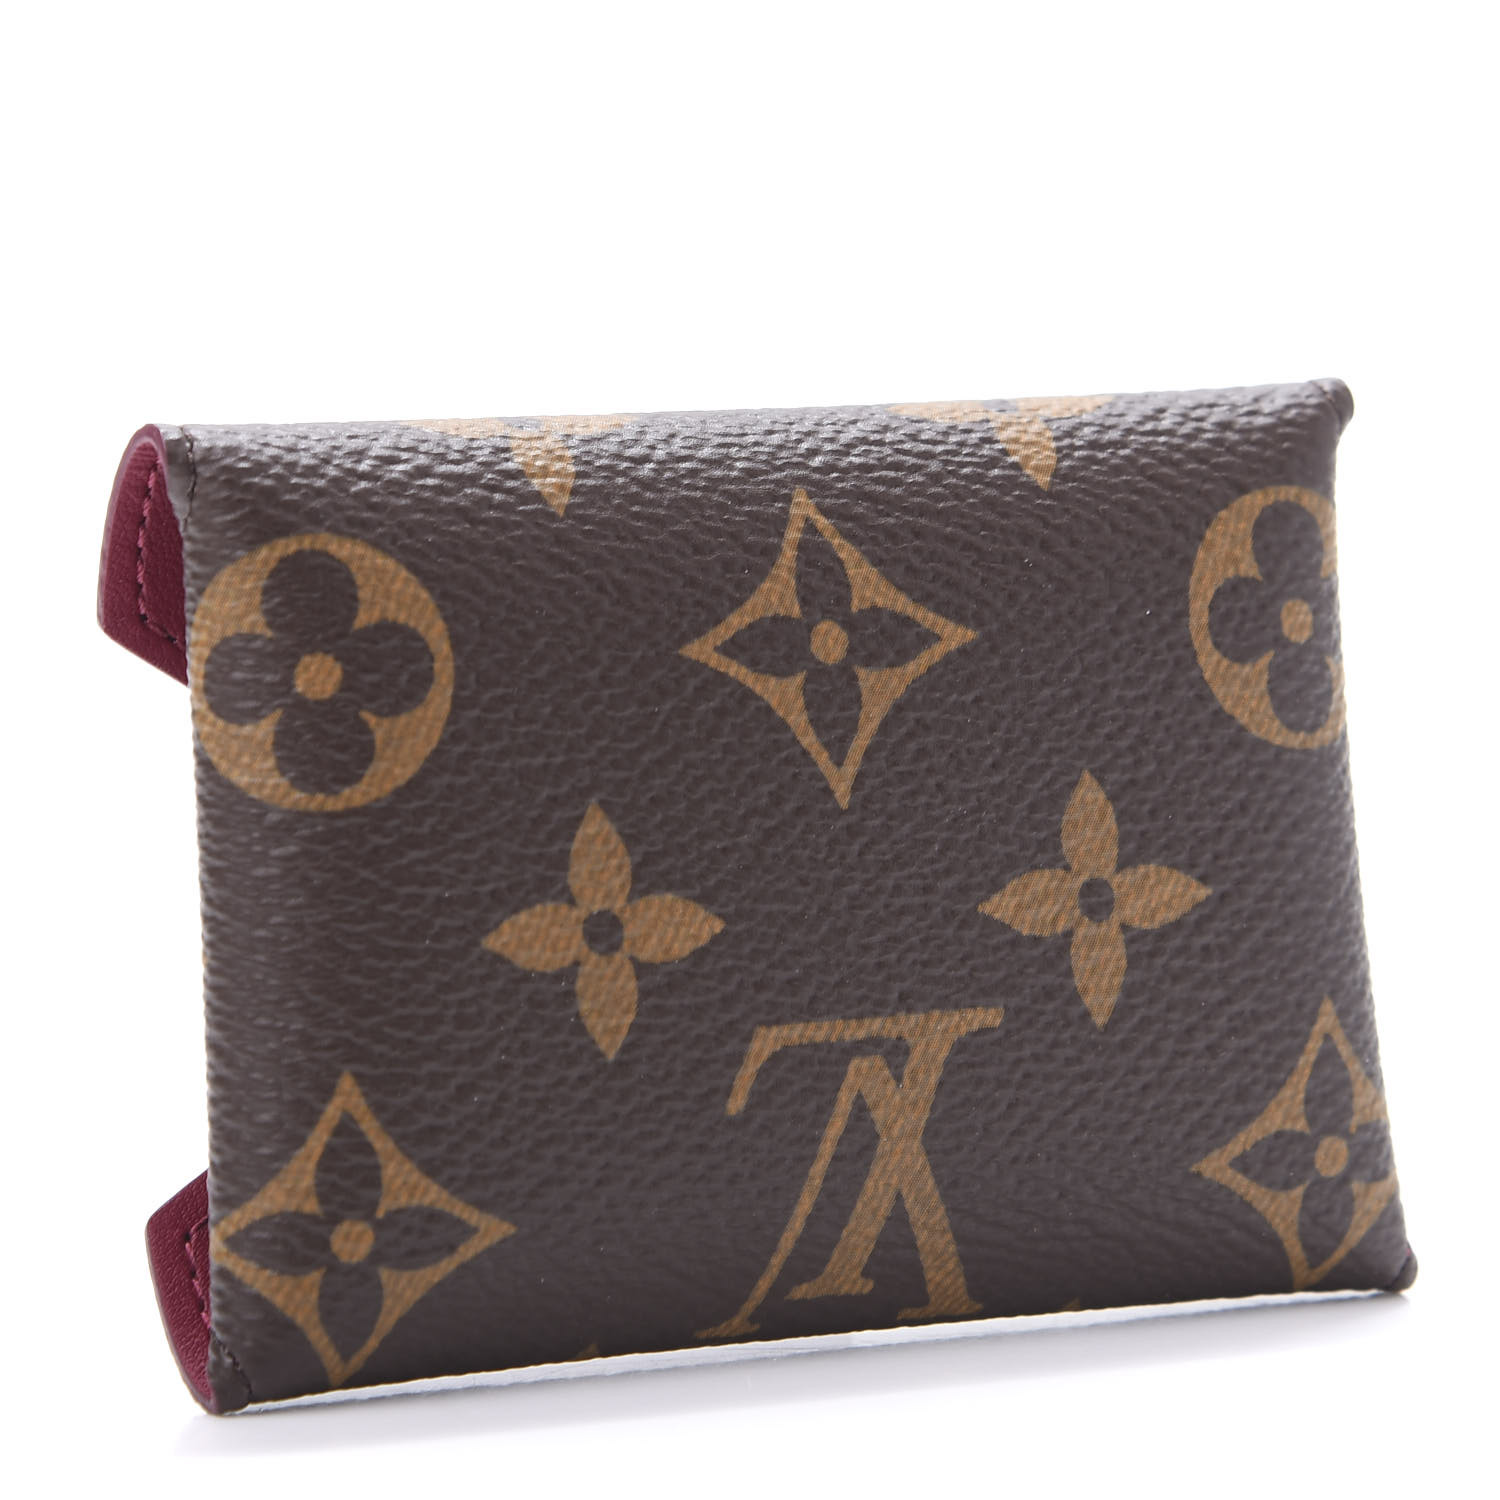 LOUIS VUITTON Kirigami Pochette LARGE Pouch Made in India